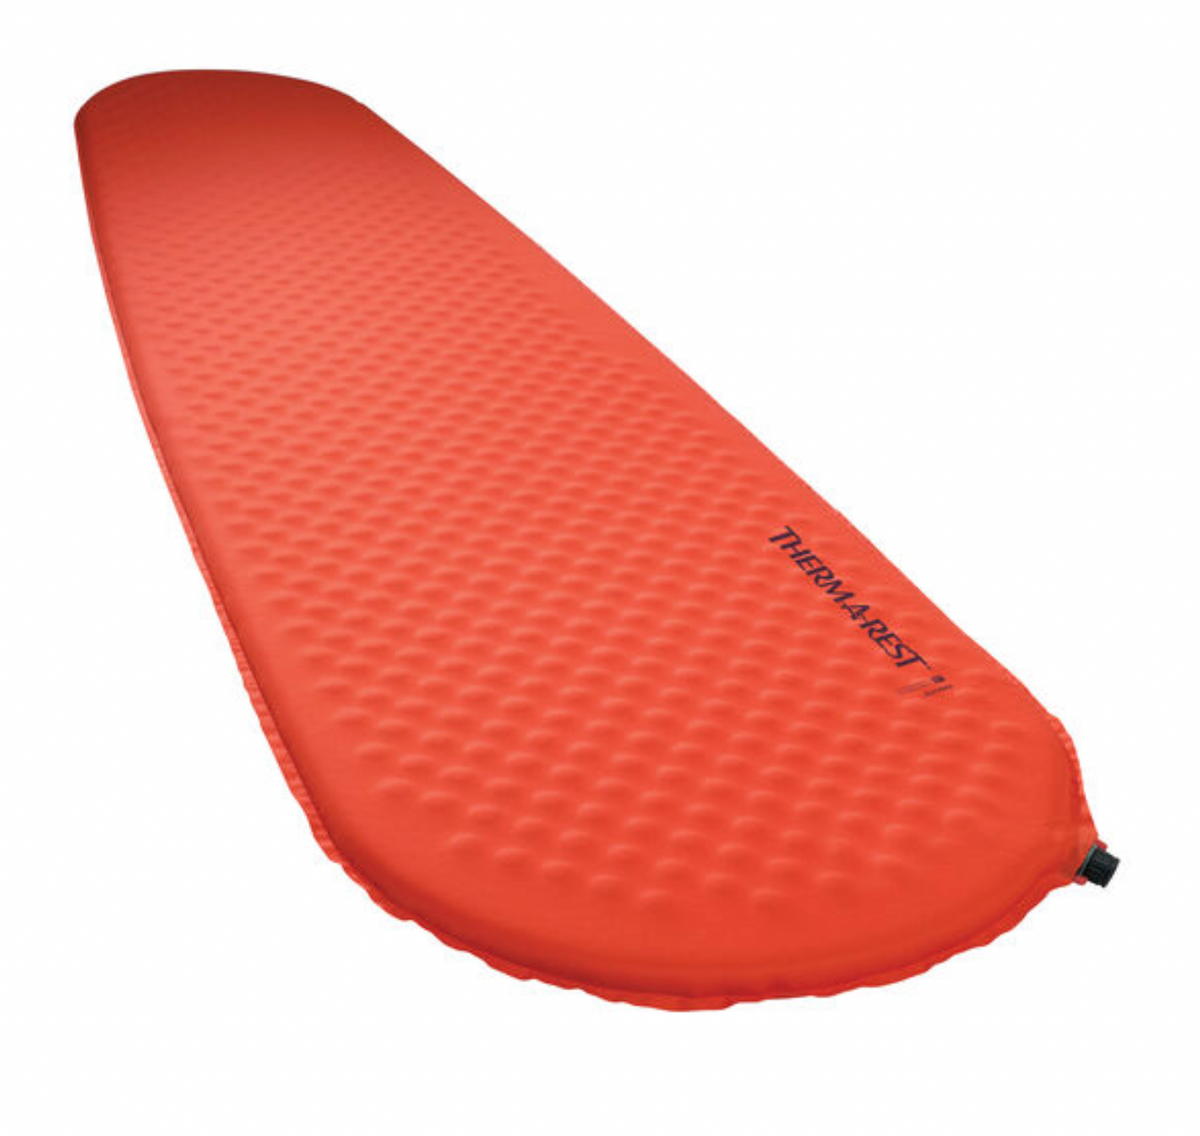 Therm-A-Rest Prolite Plus Self Inflating Sleeping Pad